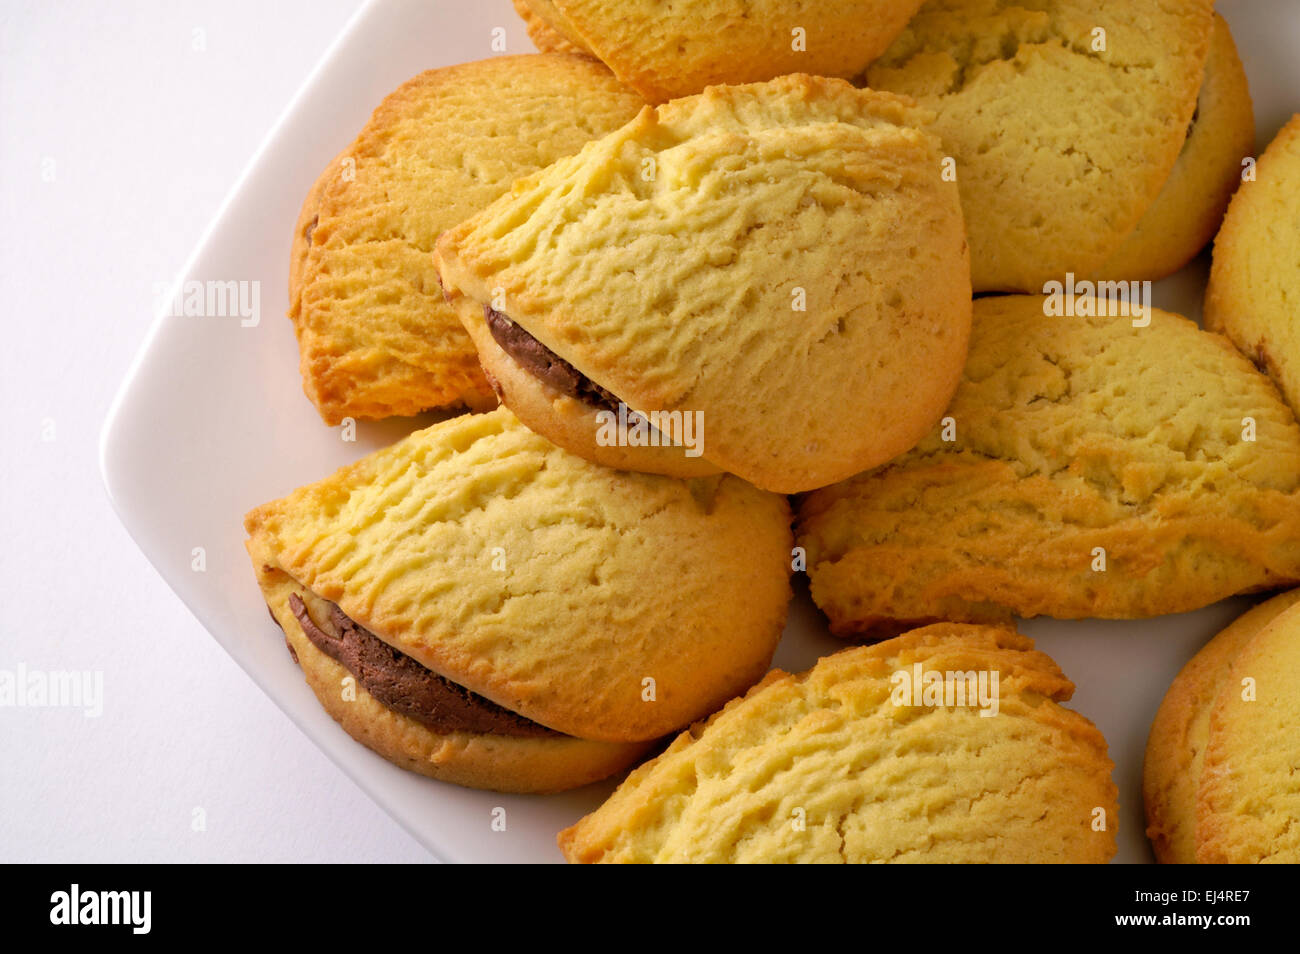 Chocolate filled pastries in a dish close-up Stock Photo